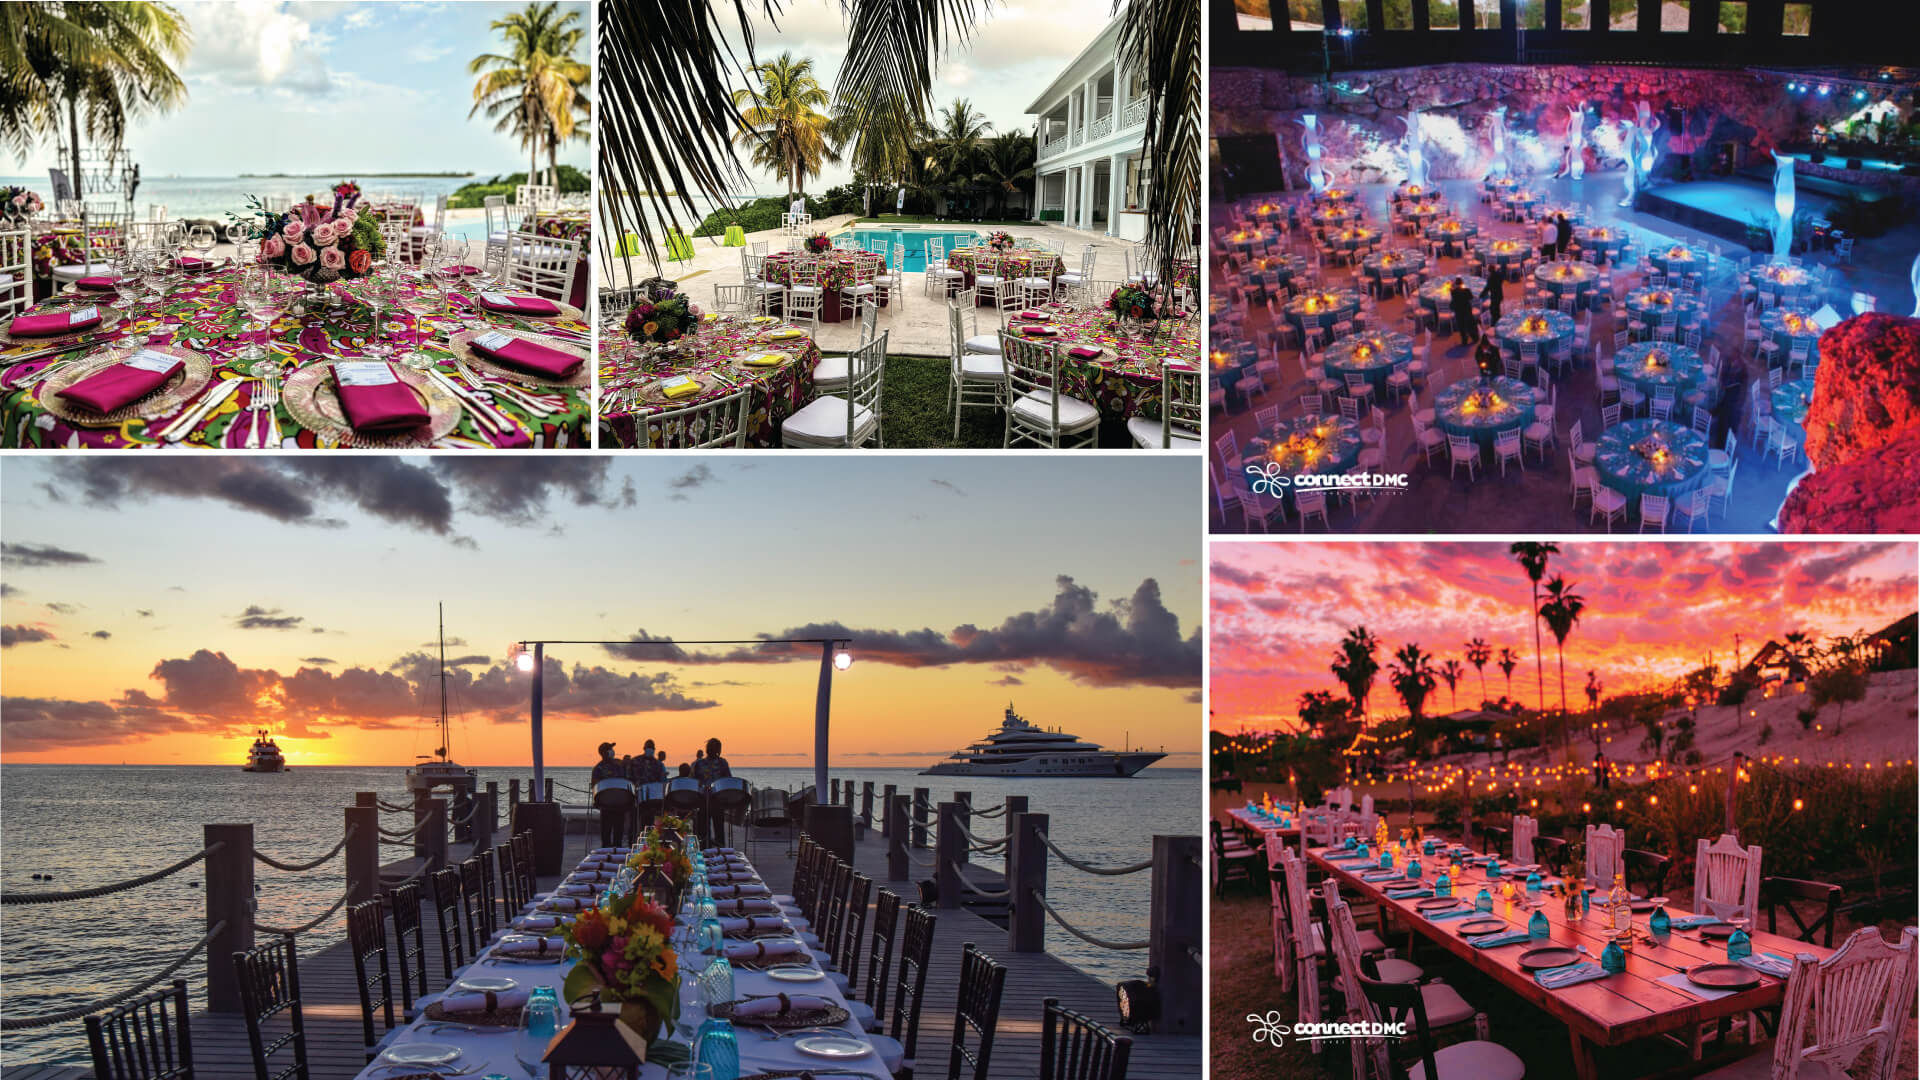 Discover fabulous events with Hosts Global Members: Cacique International, Connect DMC, and Barefoot Holidays